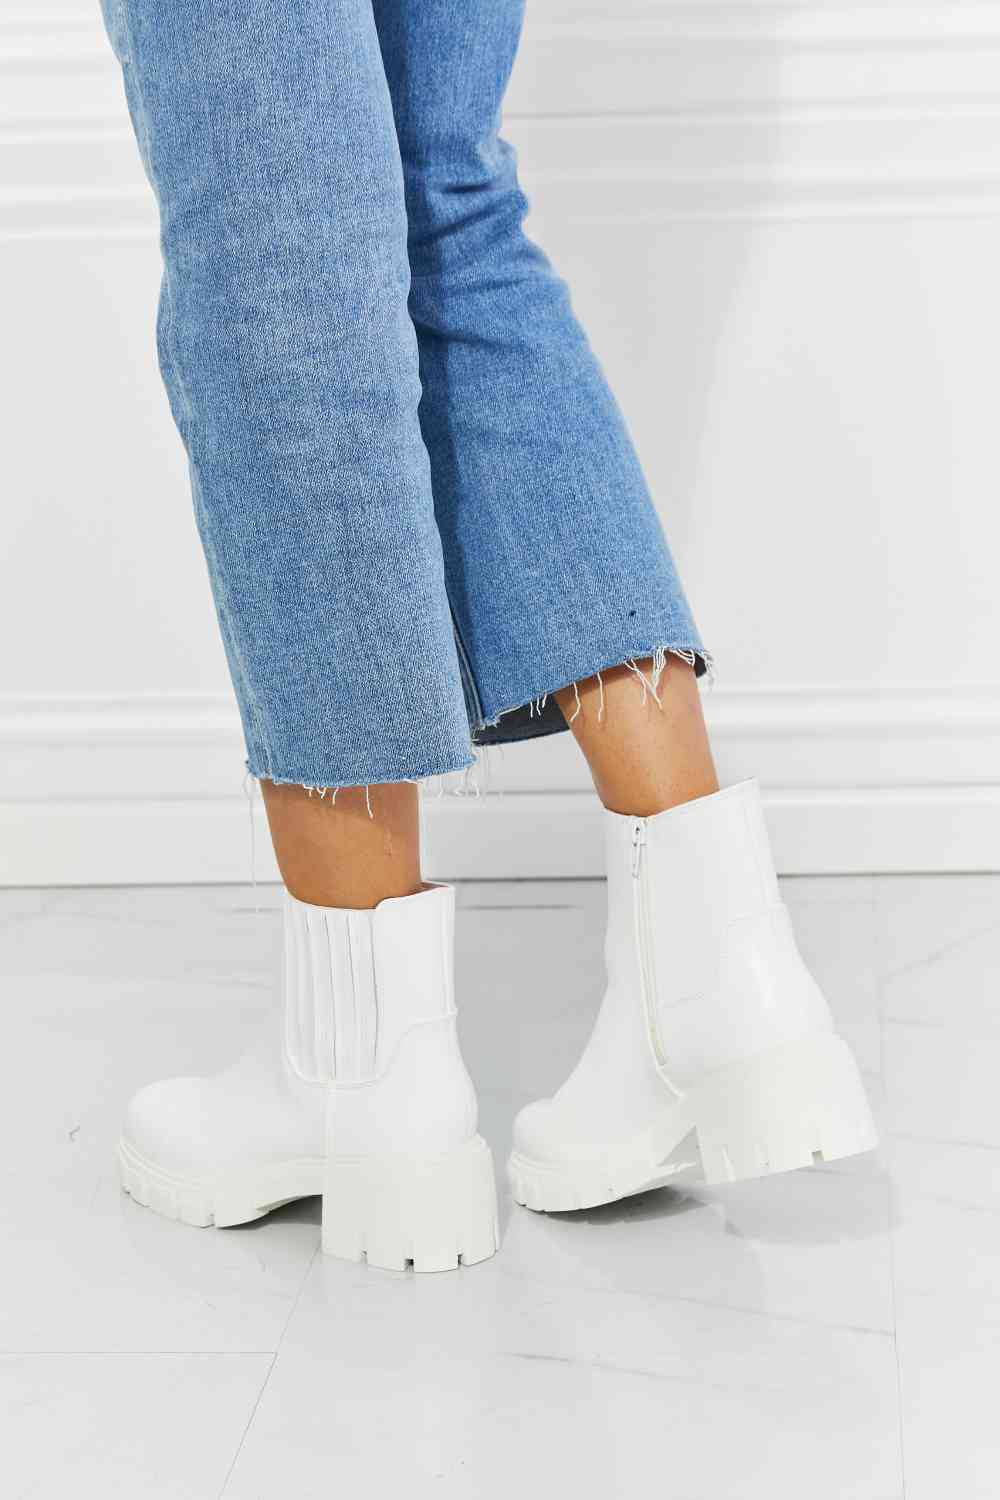 MMShoes What It Takes Lug Sole Chelsea Boots in White - Rose Gold Co. Shop